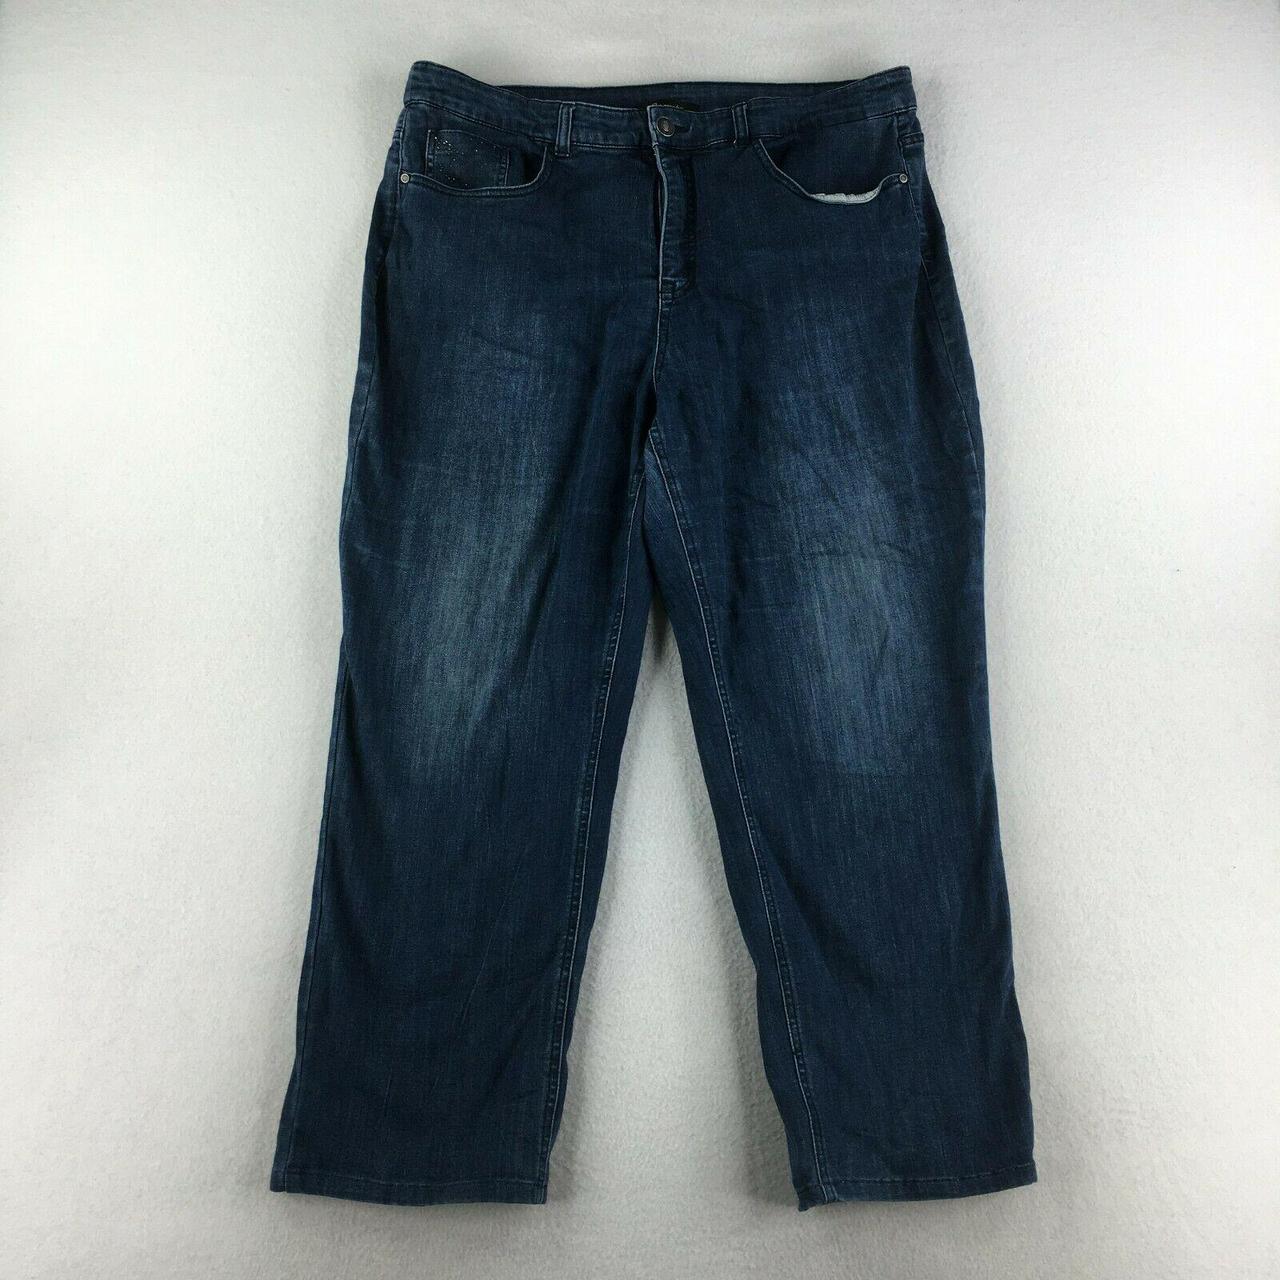 Secrets Collection By David Vered Jeans Womens 16... - Depop